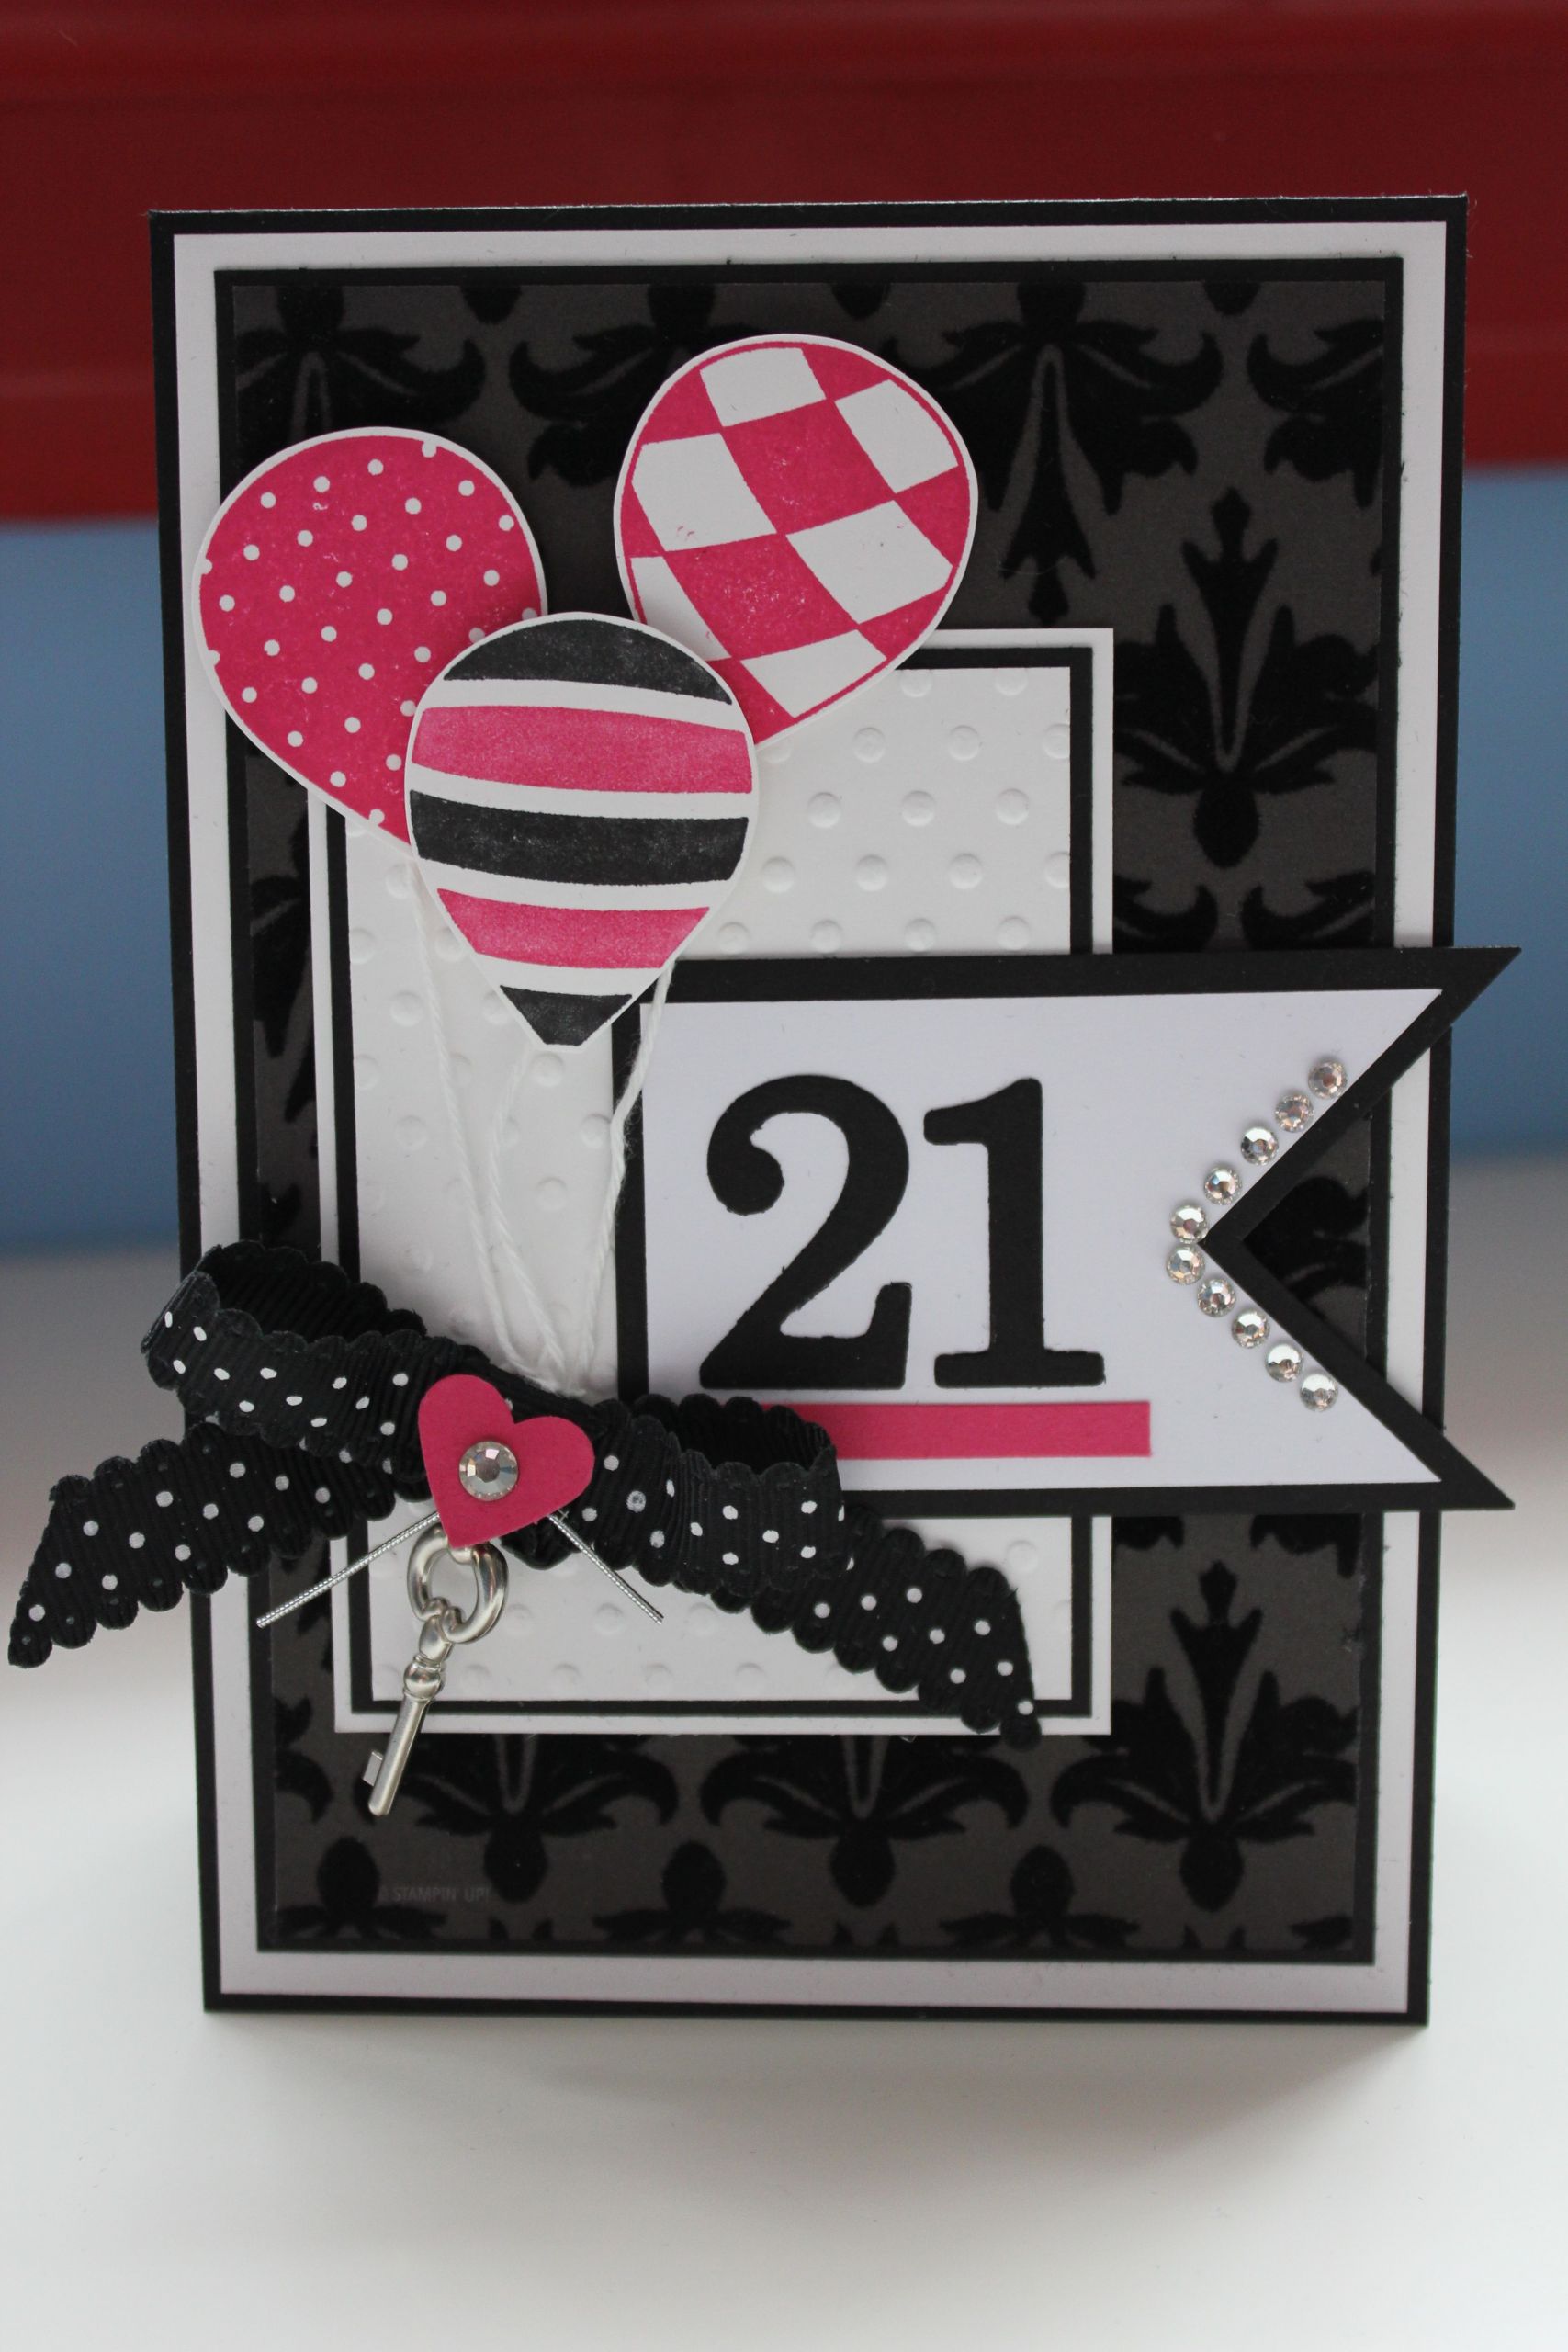 21st Birthday Card Ideas
 Out of this world birthday card